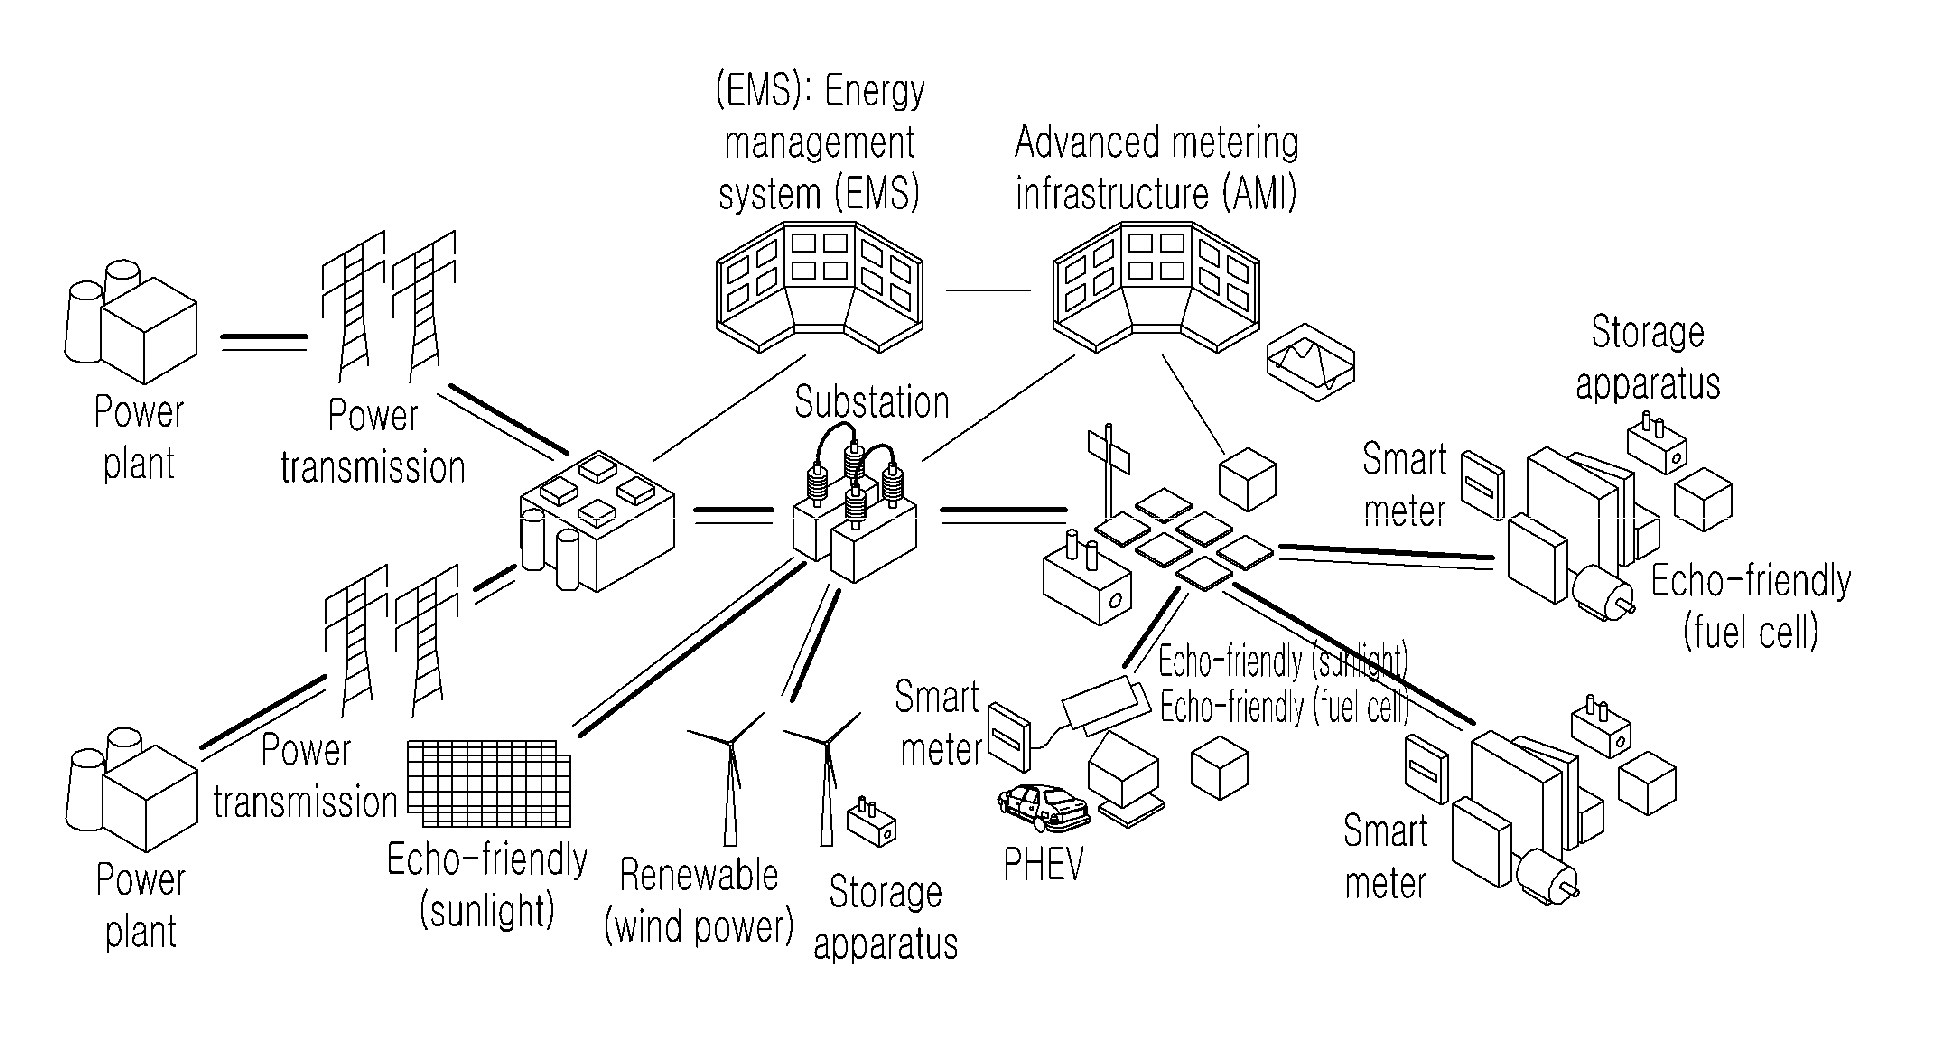 Network system